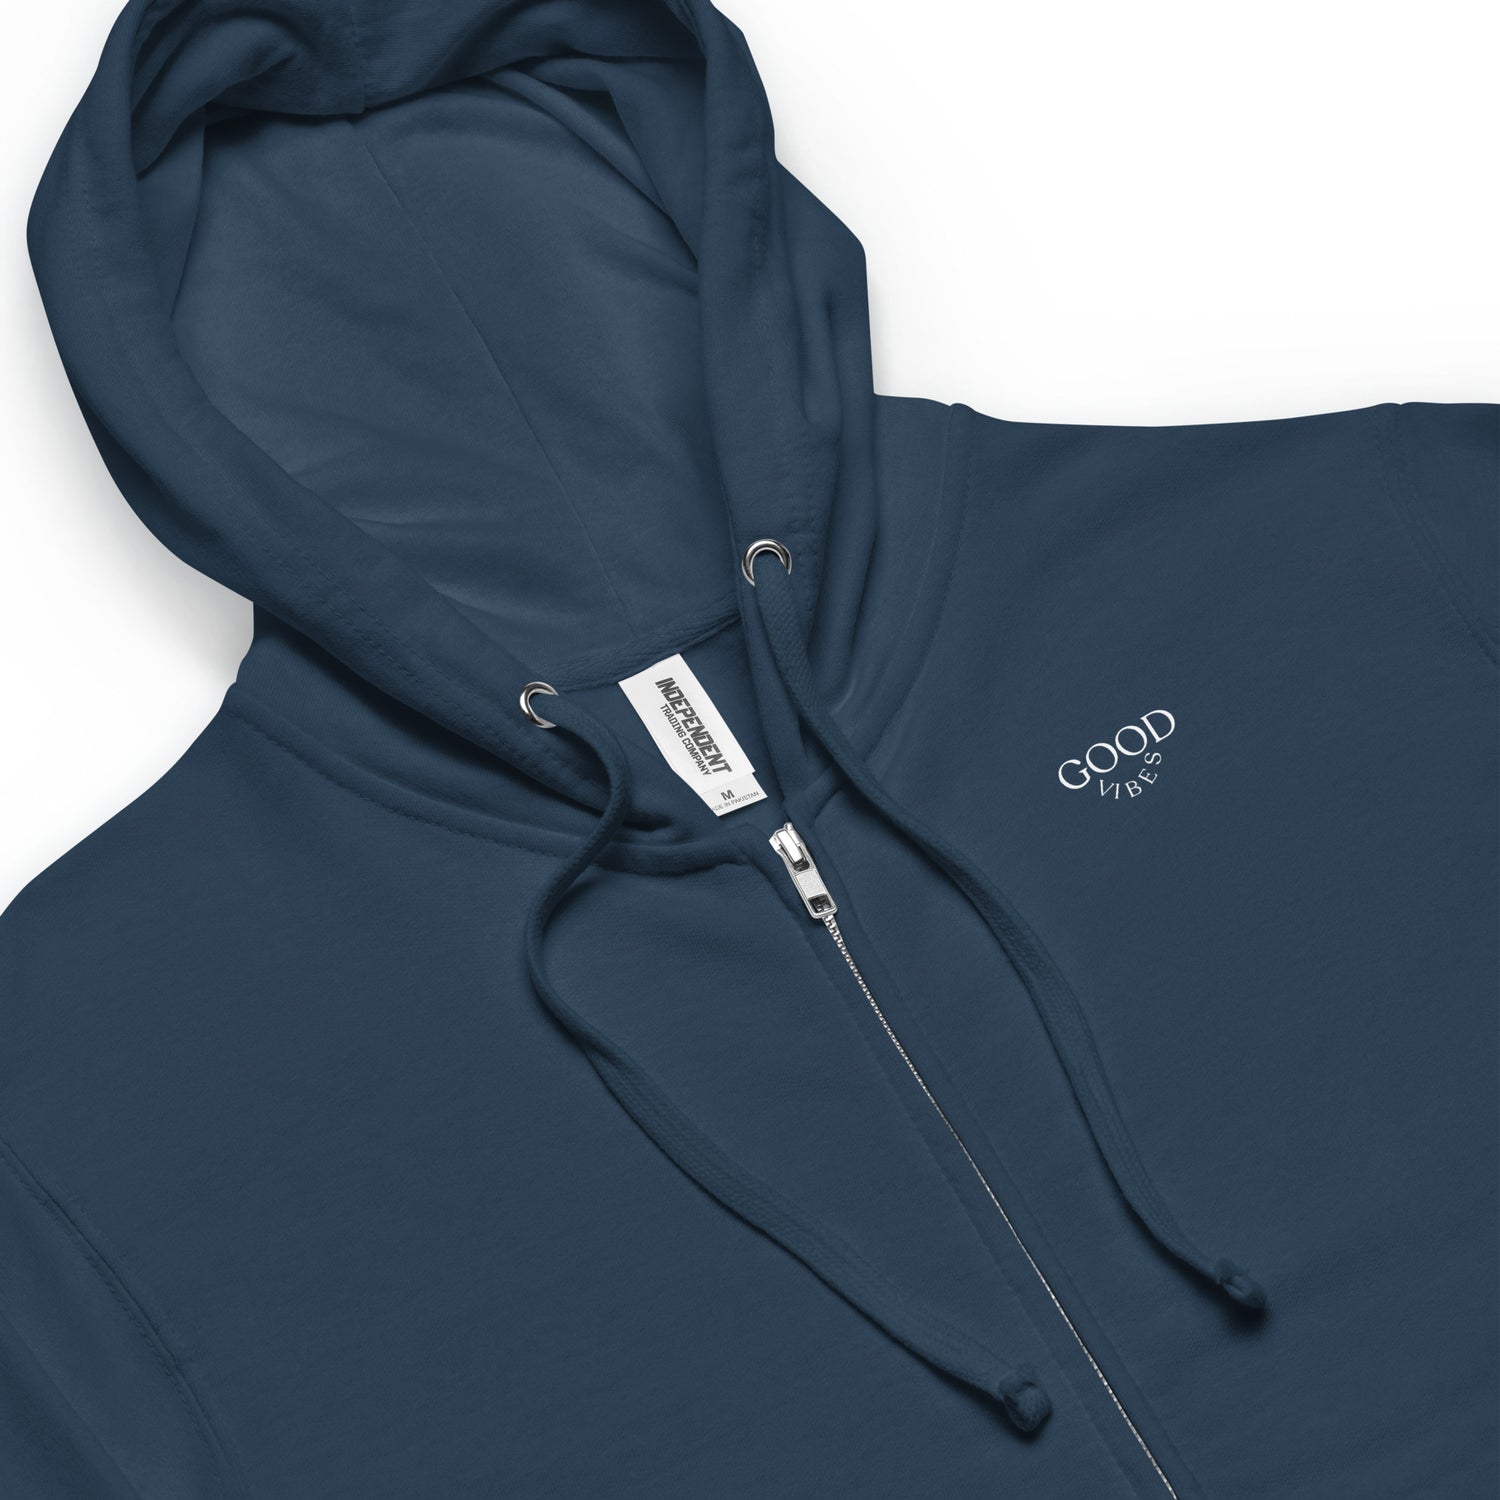 Close-up of a Navy zip-up hoodie featuring the empowering message "Good vibes" for mental health.